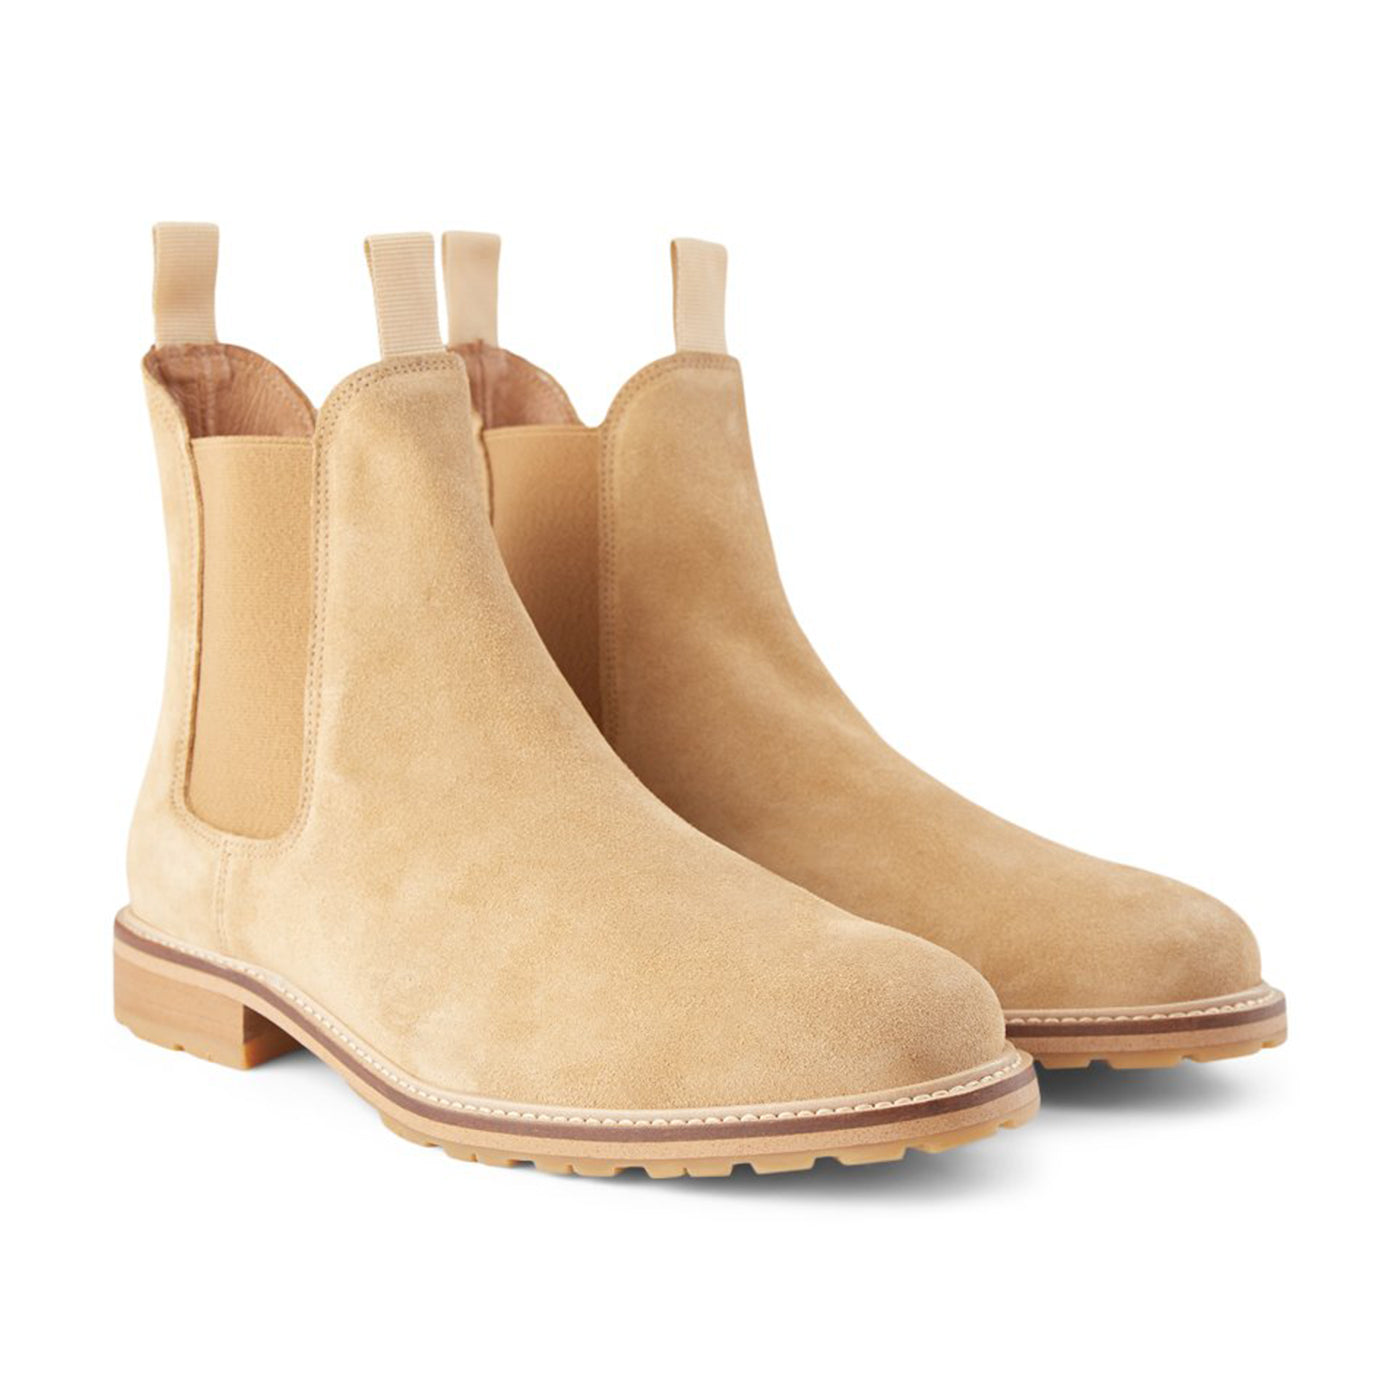 SHOE THE BEAR MENS York chelsea boot water resistant Chelsea Boots 153 CAMEL